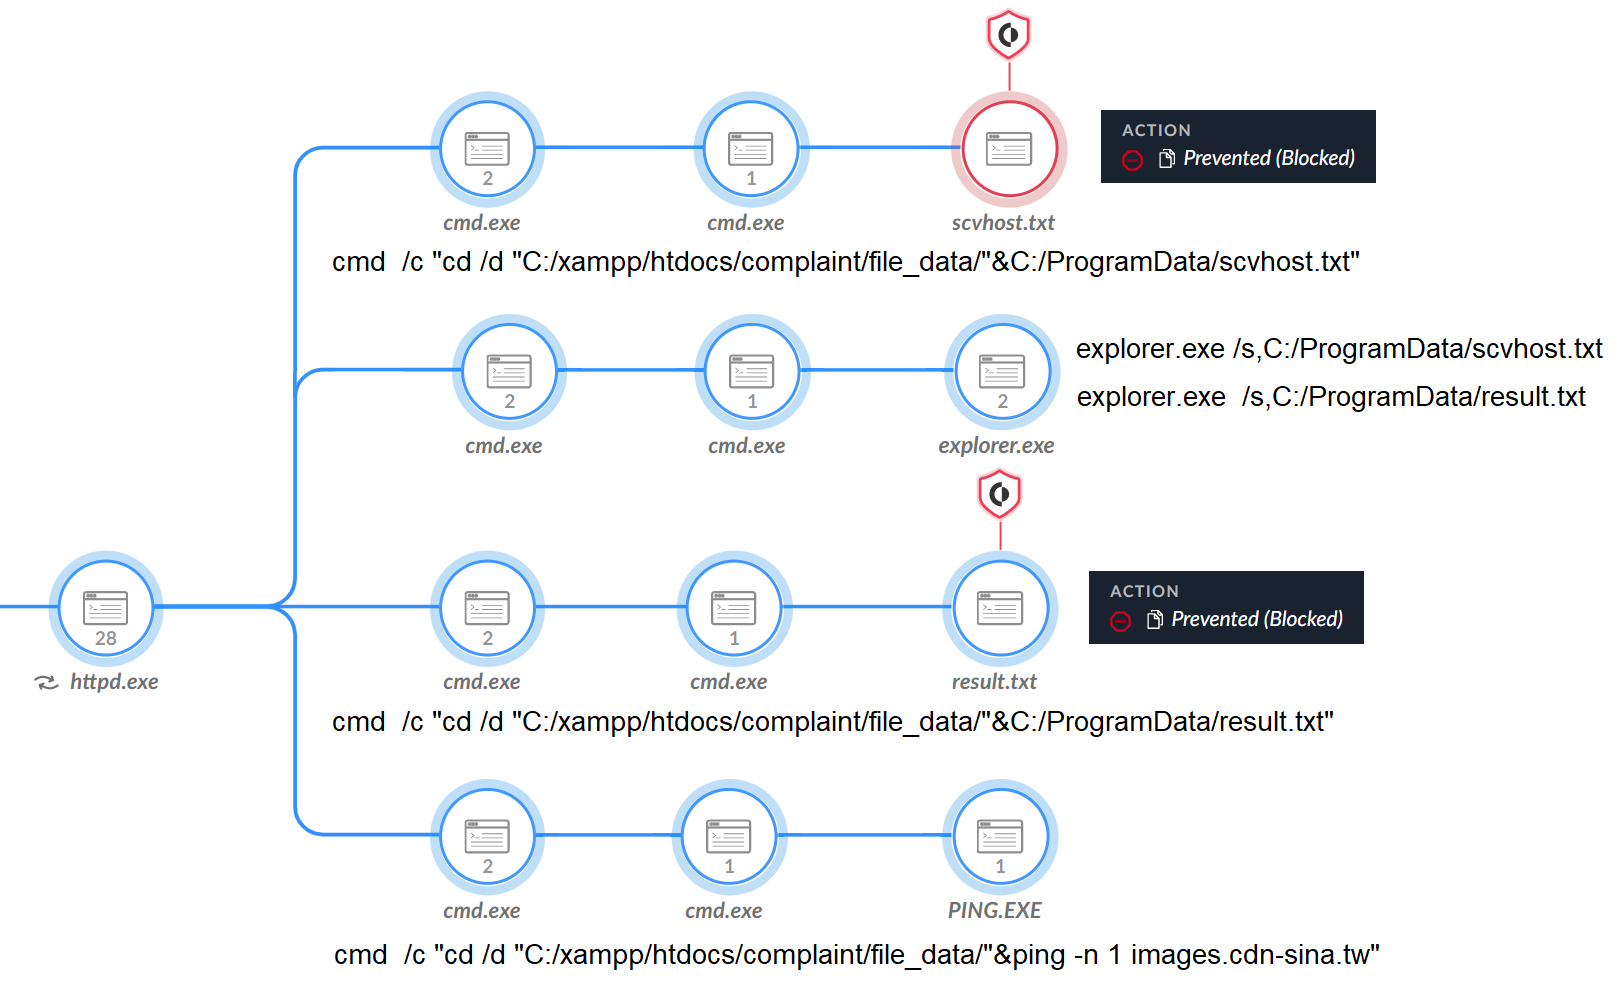 Image 8 is a screenshot of a tree diagram in Cortex XDR. The tree splits once and has four branches. Included are the commands used by the threat actor. Two actions are prevented: scvhost.text and result.txt.